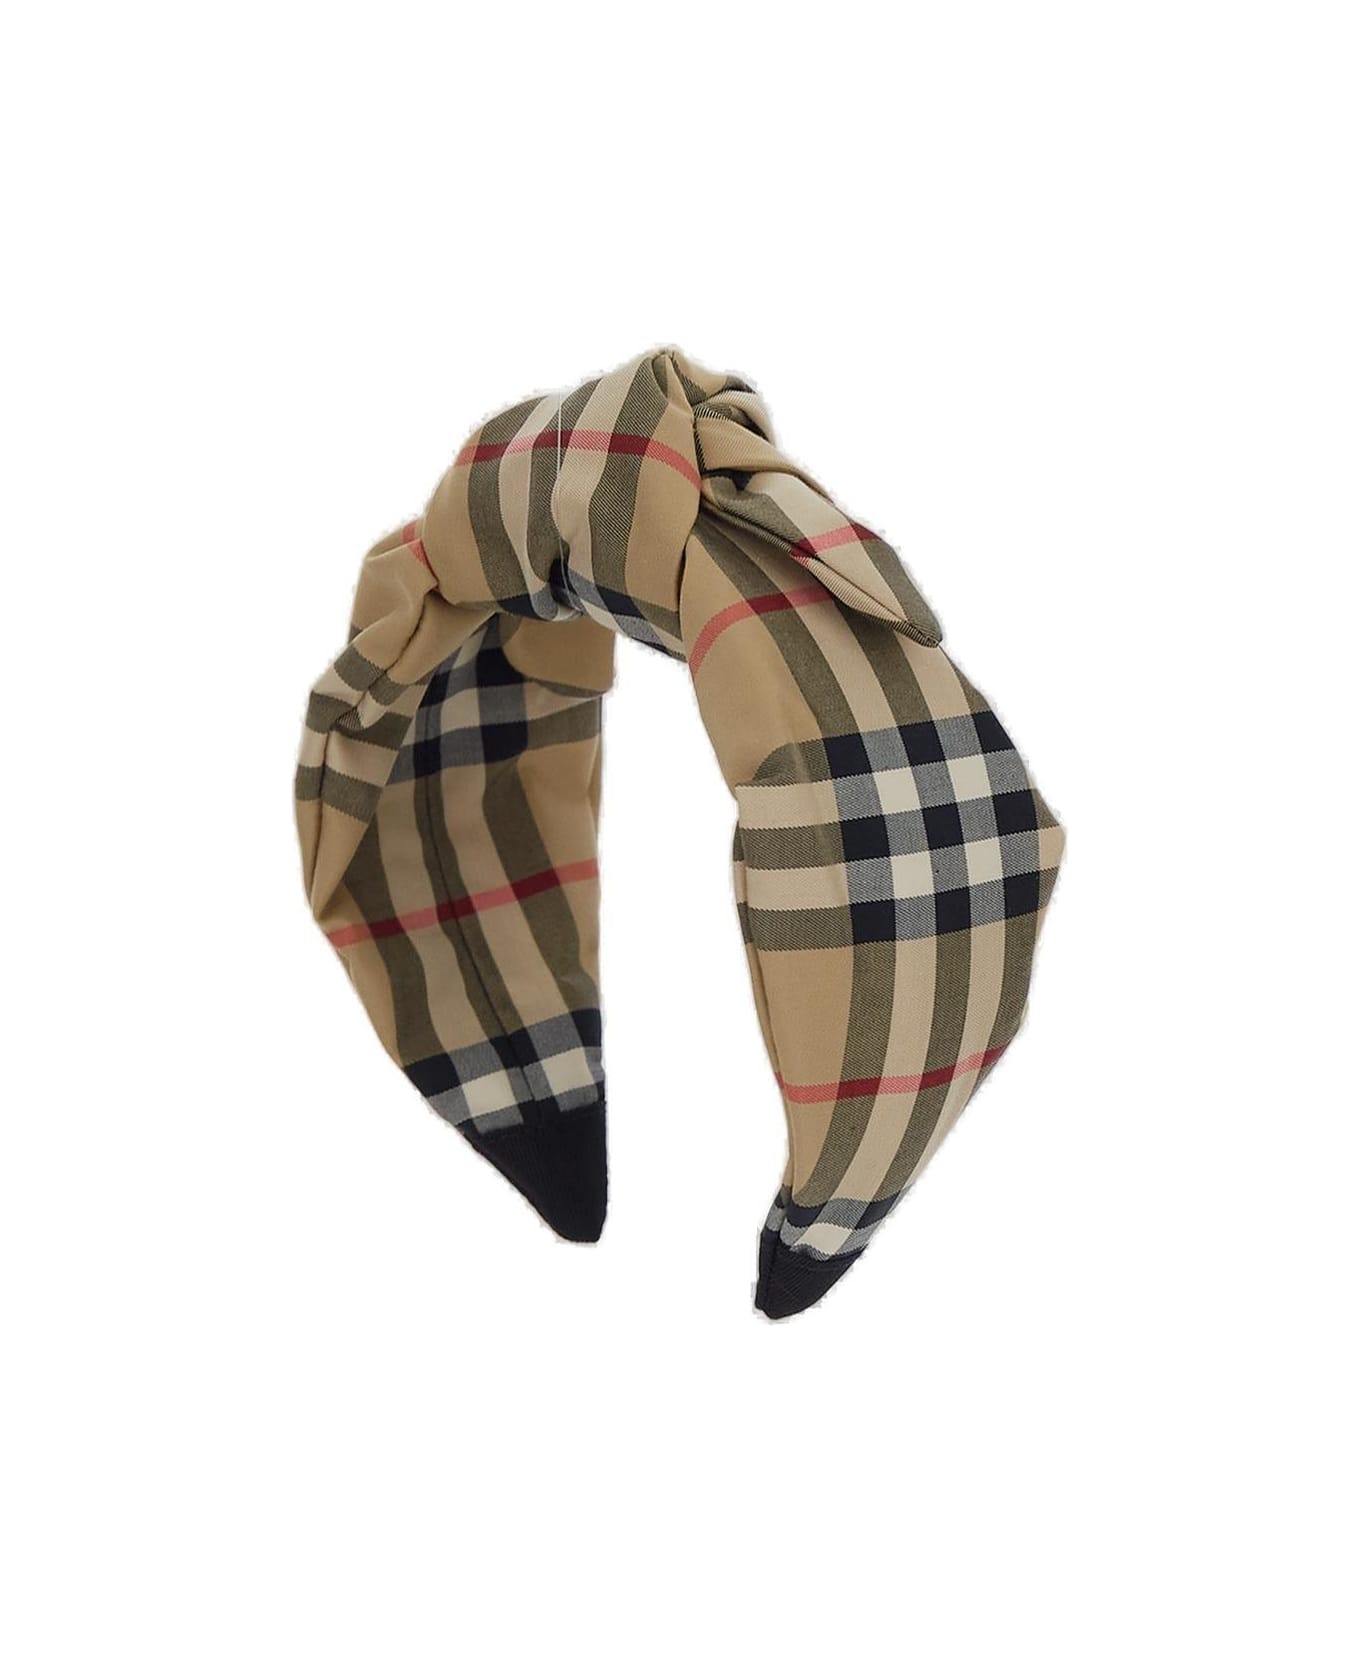 Burberry Checked Knot-detailed Headband - Archive beige chk